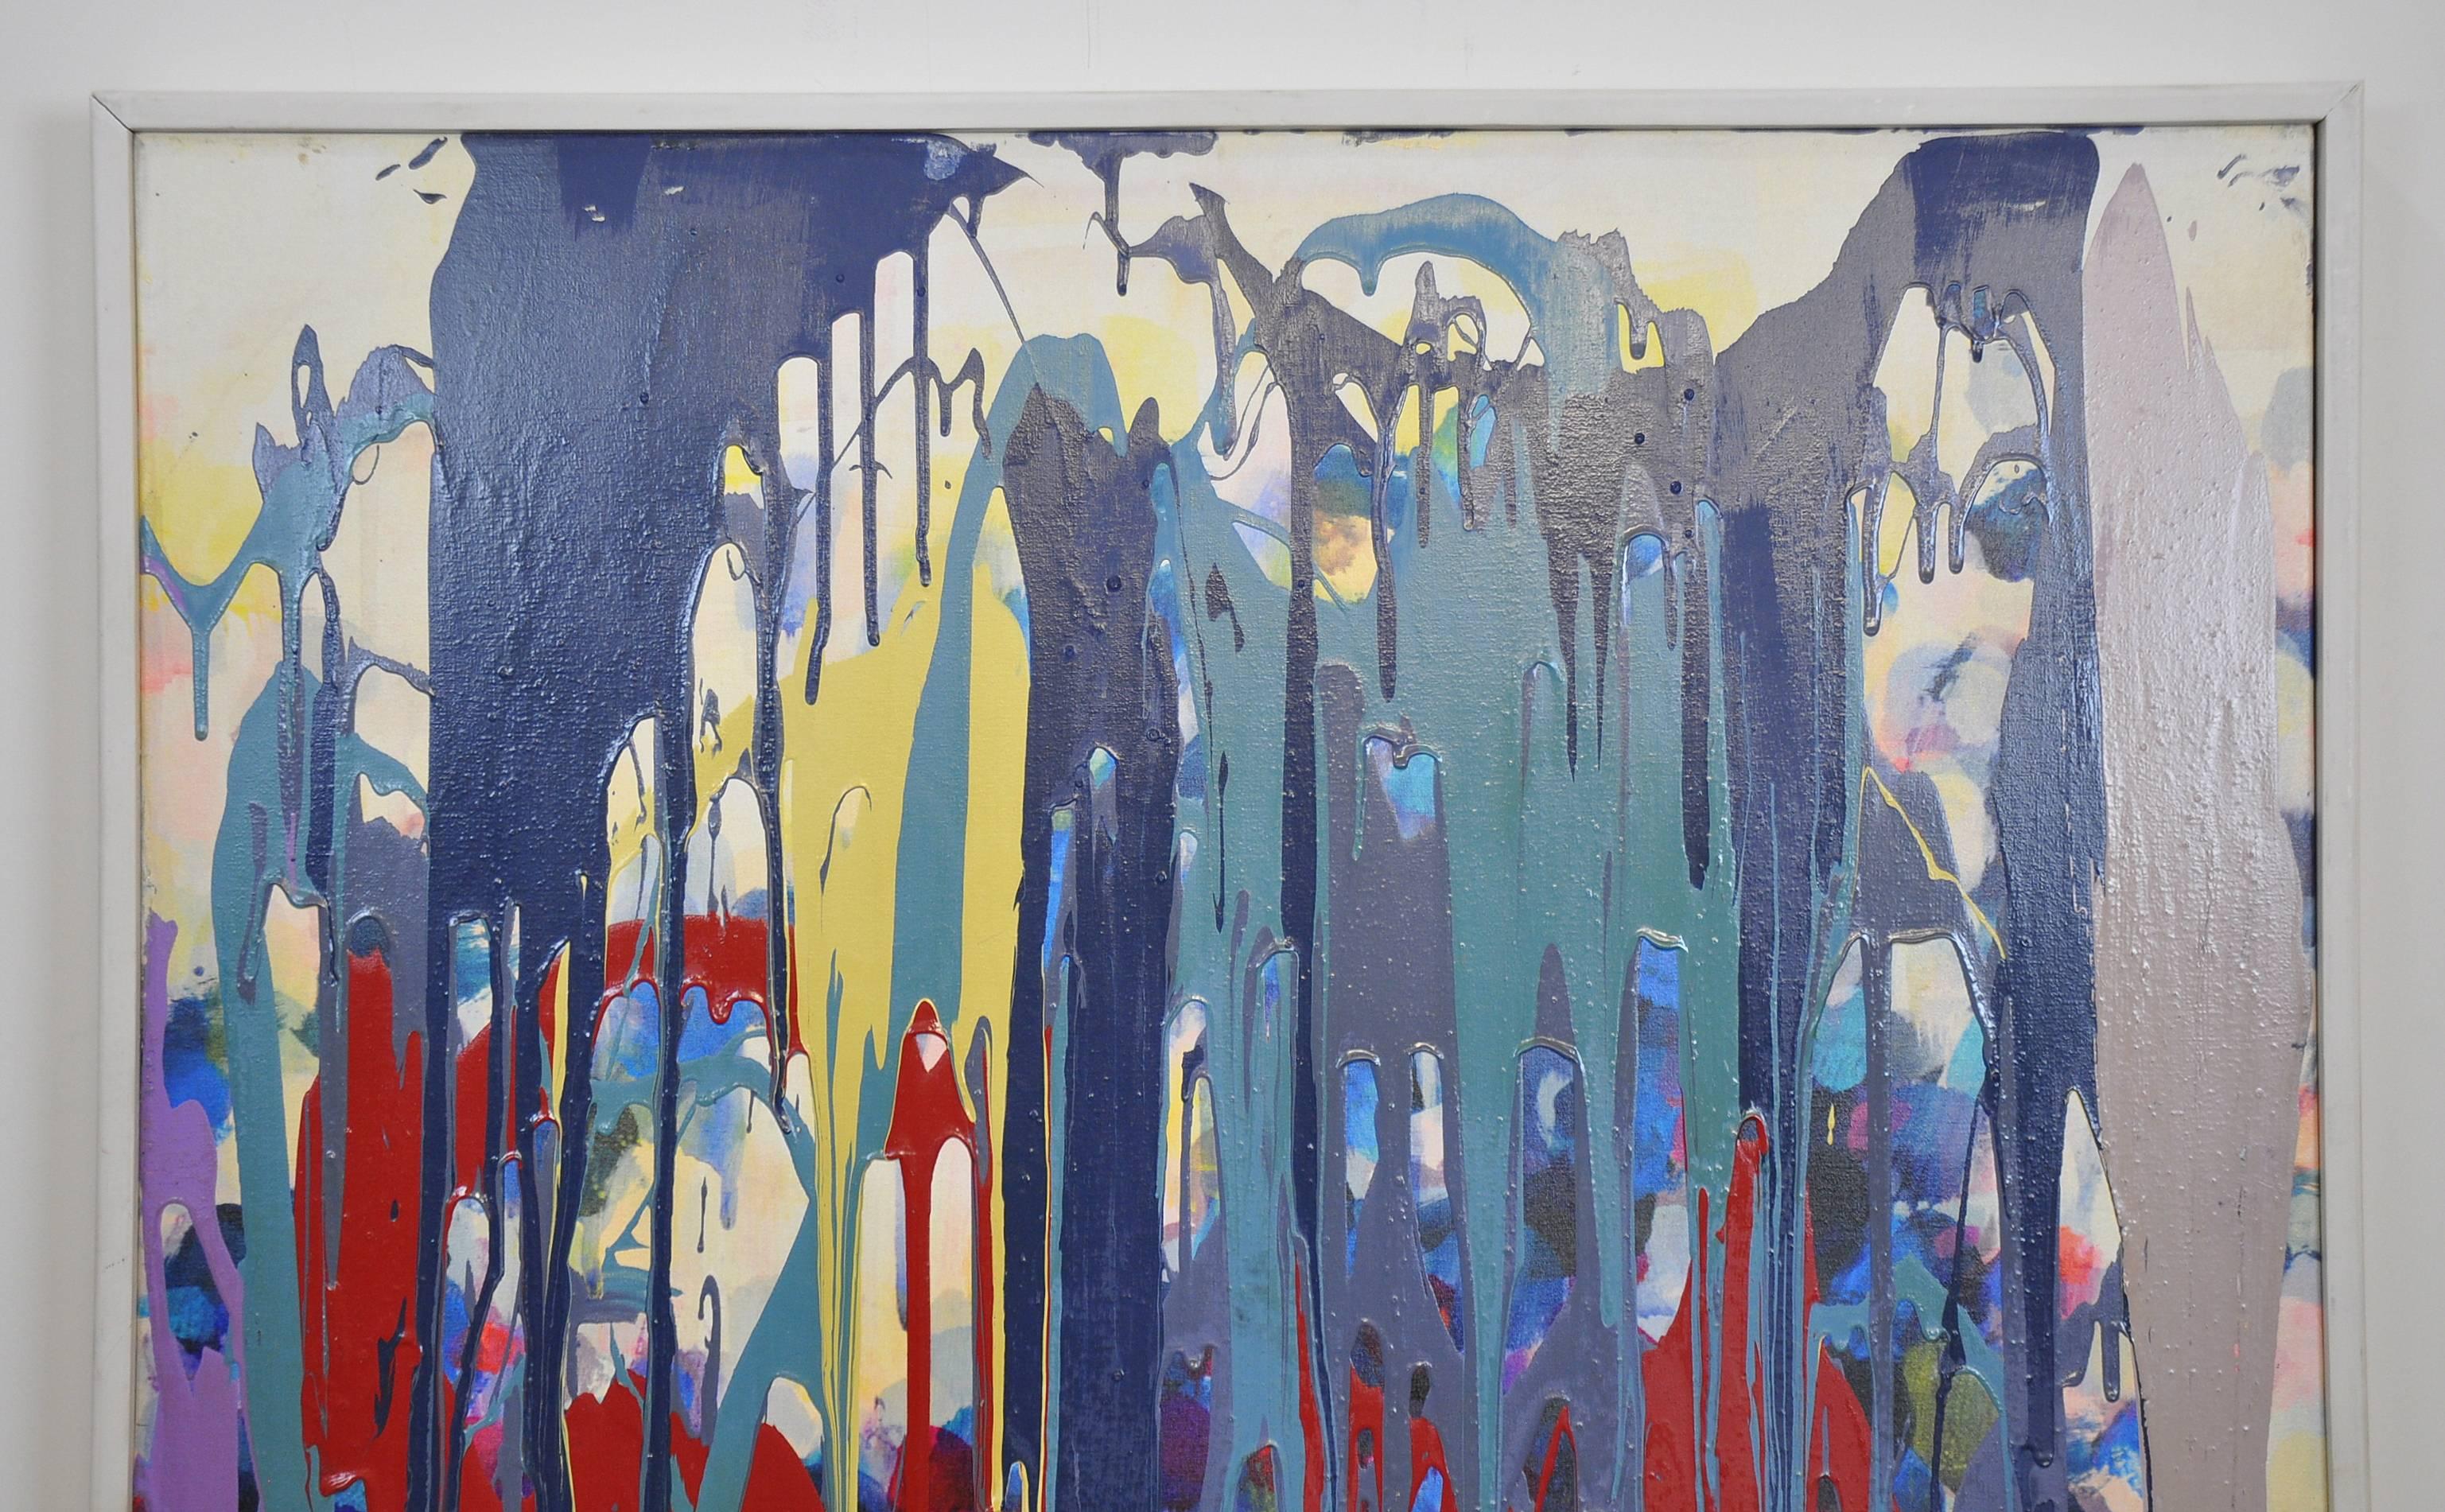 Other Abstract Drip Painting on Canvas by John Frates, Blue Song, 2015